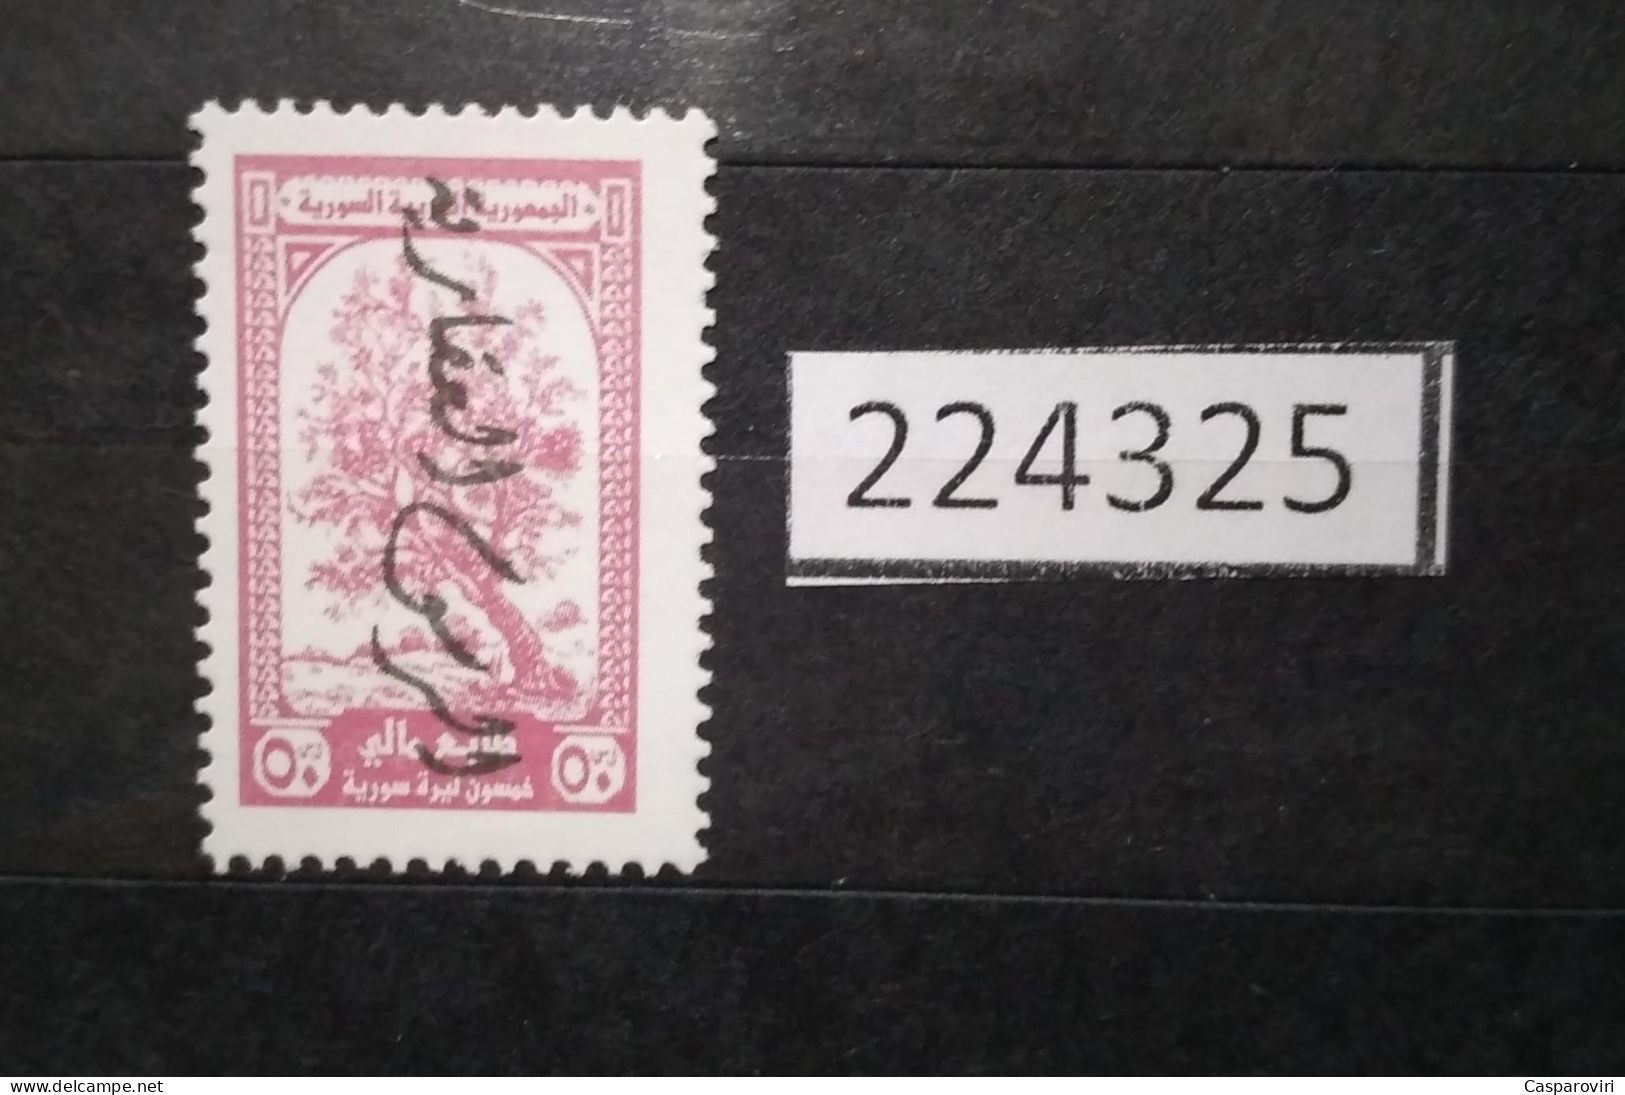 224325; Syria; Revenue Stamp 50 Pounds; General Revenue Stamps; Ovpt. Real Estate Fees; White Paper Without WM; MNH - Syria